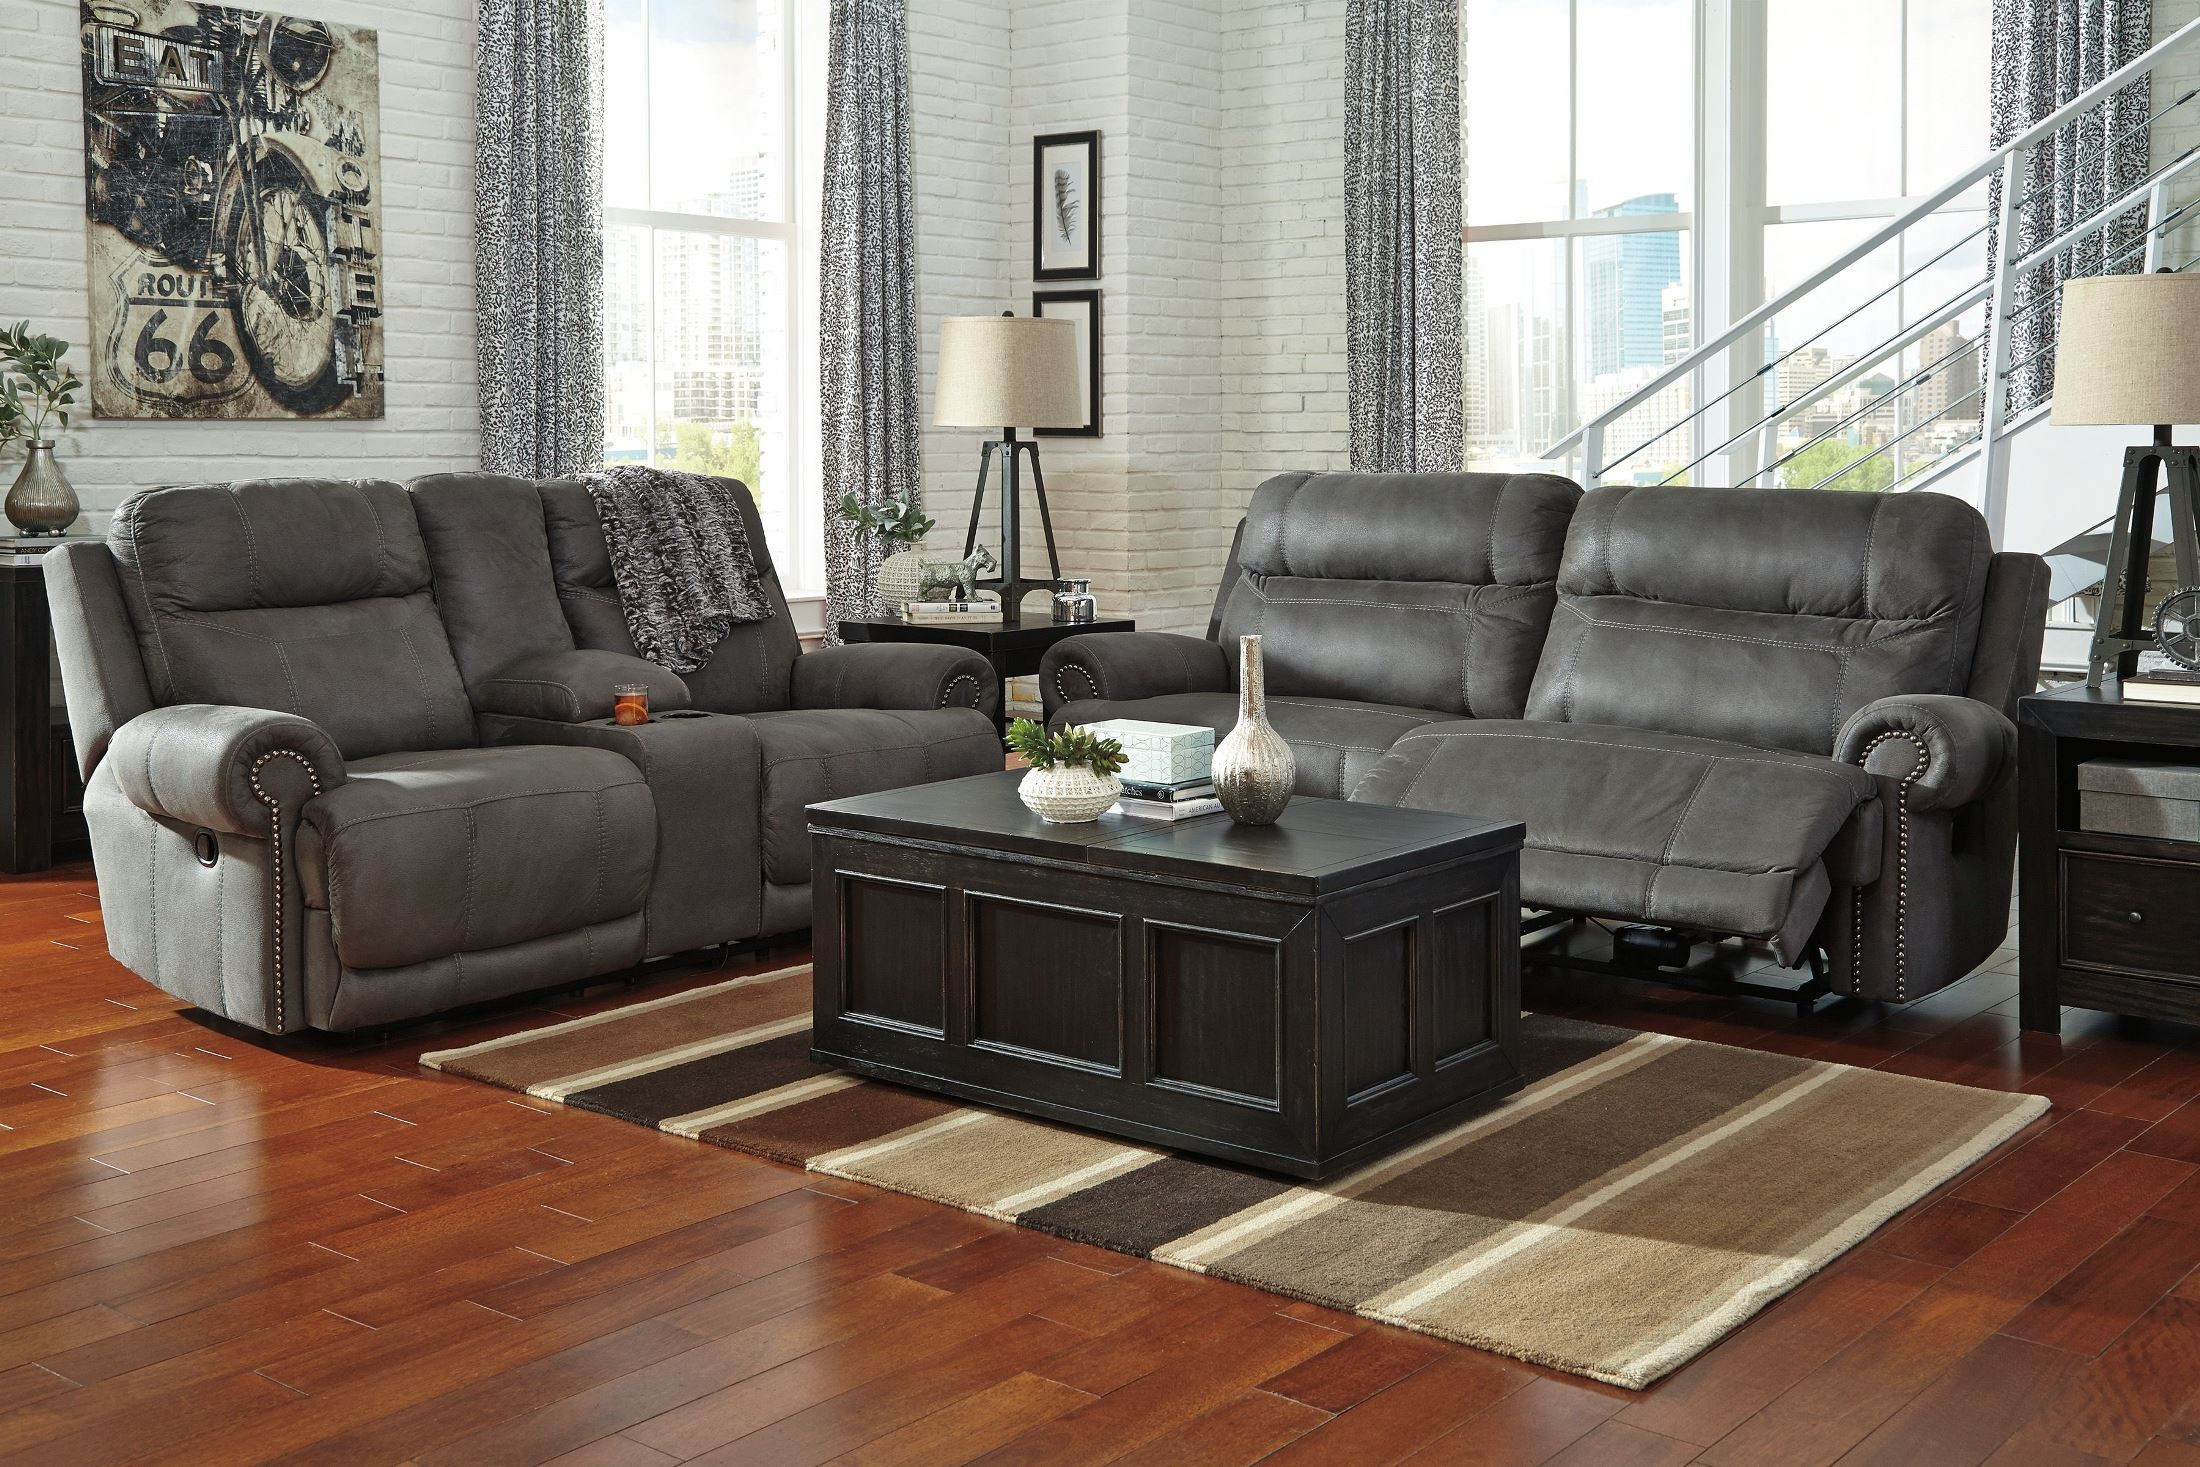 Living Room Recliner Chairs
 Austere Gray Power Reclining Living Room Set from Ashley